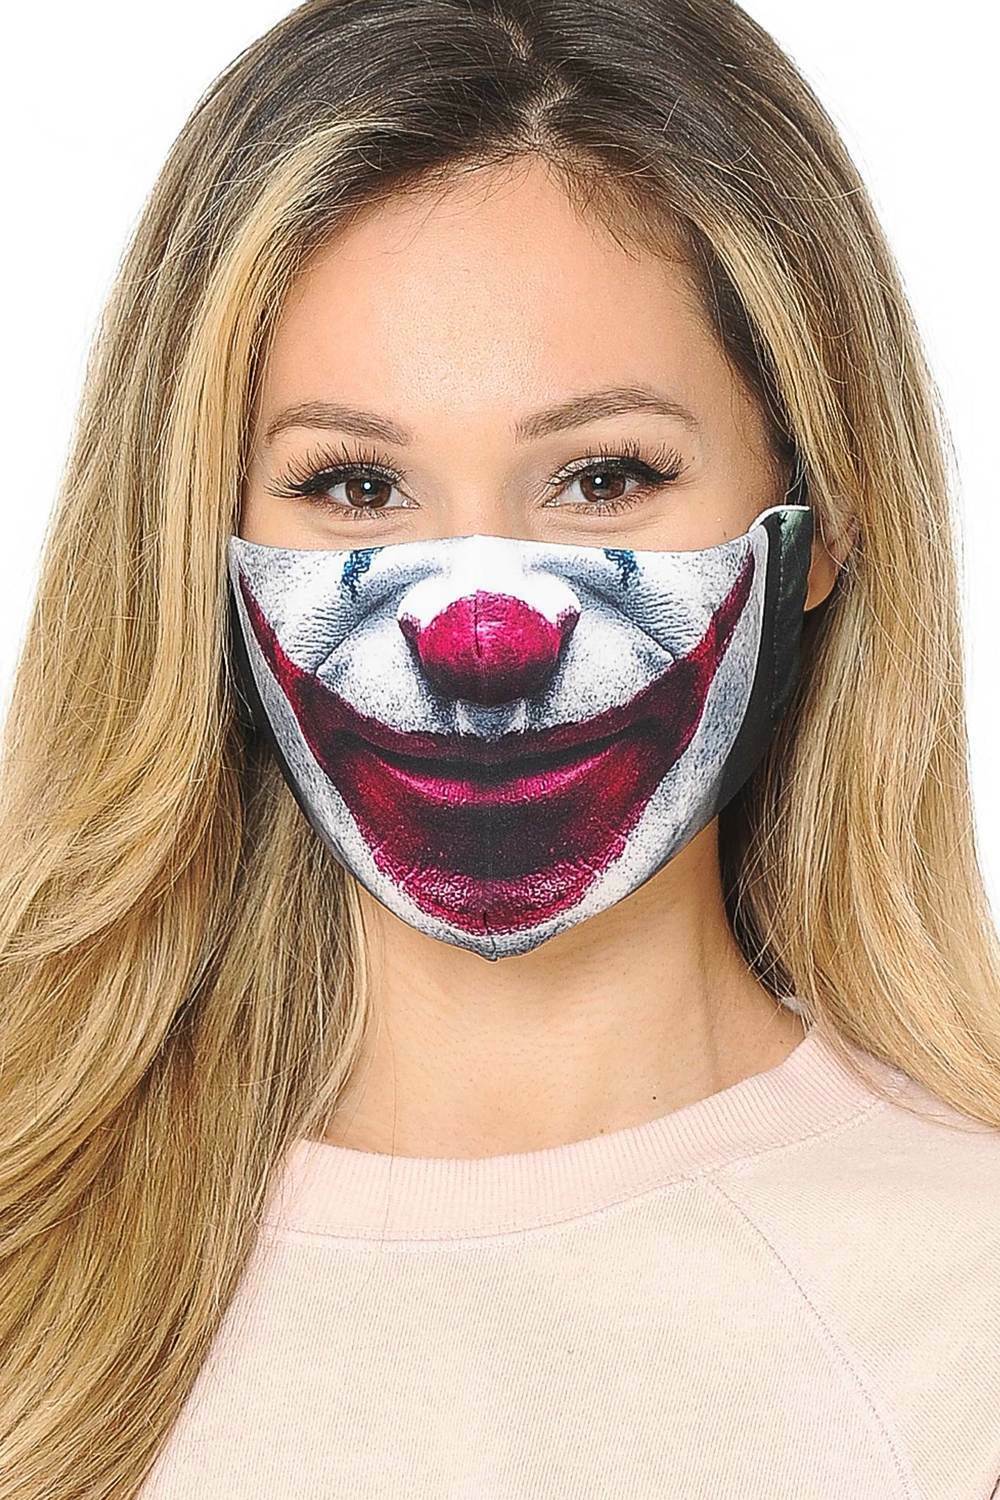 Joker Style Graphic Print Face Mask PM2.5 Filter Pocket safety NEW EACH